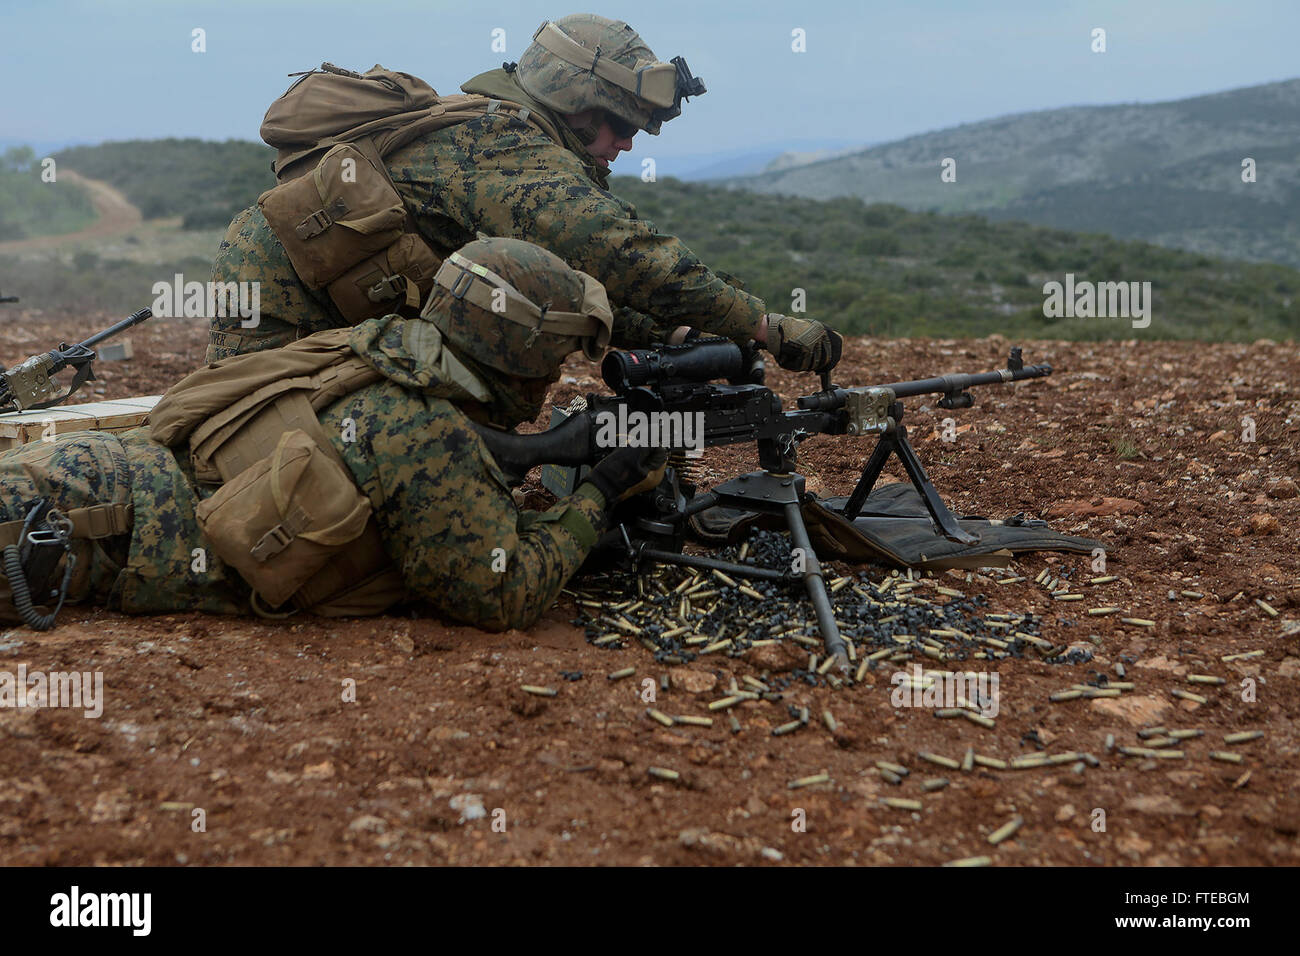 140310-M-WB921-602 GREECE (March 10, 2014) - U.S. Marines with Battalion Landing Team 1st Battalion, 6th Marine Regiment, 22nd Marine Expeditionary Unit (MEU), provide suppressing fire during a bilateral training exercise with the Hellenic Army. The U.S. and Greece regularly conduct scheduled military exercises to strengthen professional and personal relationships. The MEU is deployed to the U.S. 6th Fleet area of operations with the Bataan Amphibious Ready Group as a sea-based, expeditionary crisis response force capable of conducting amphibious missions across the full range of military oper Stock Photo